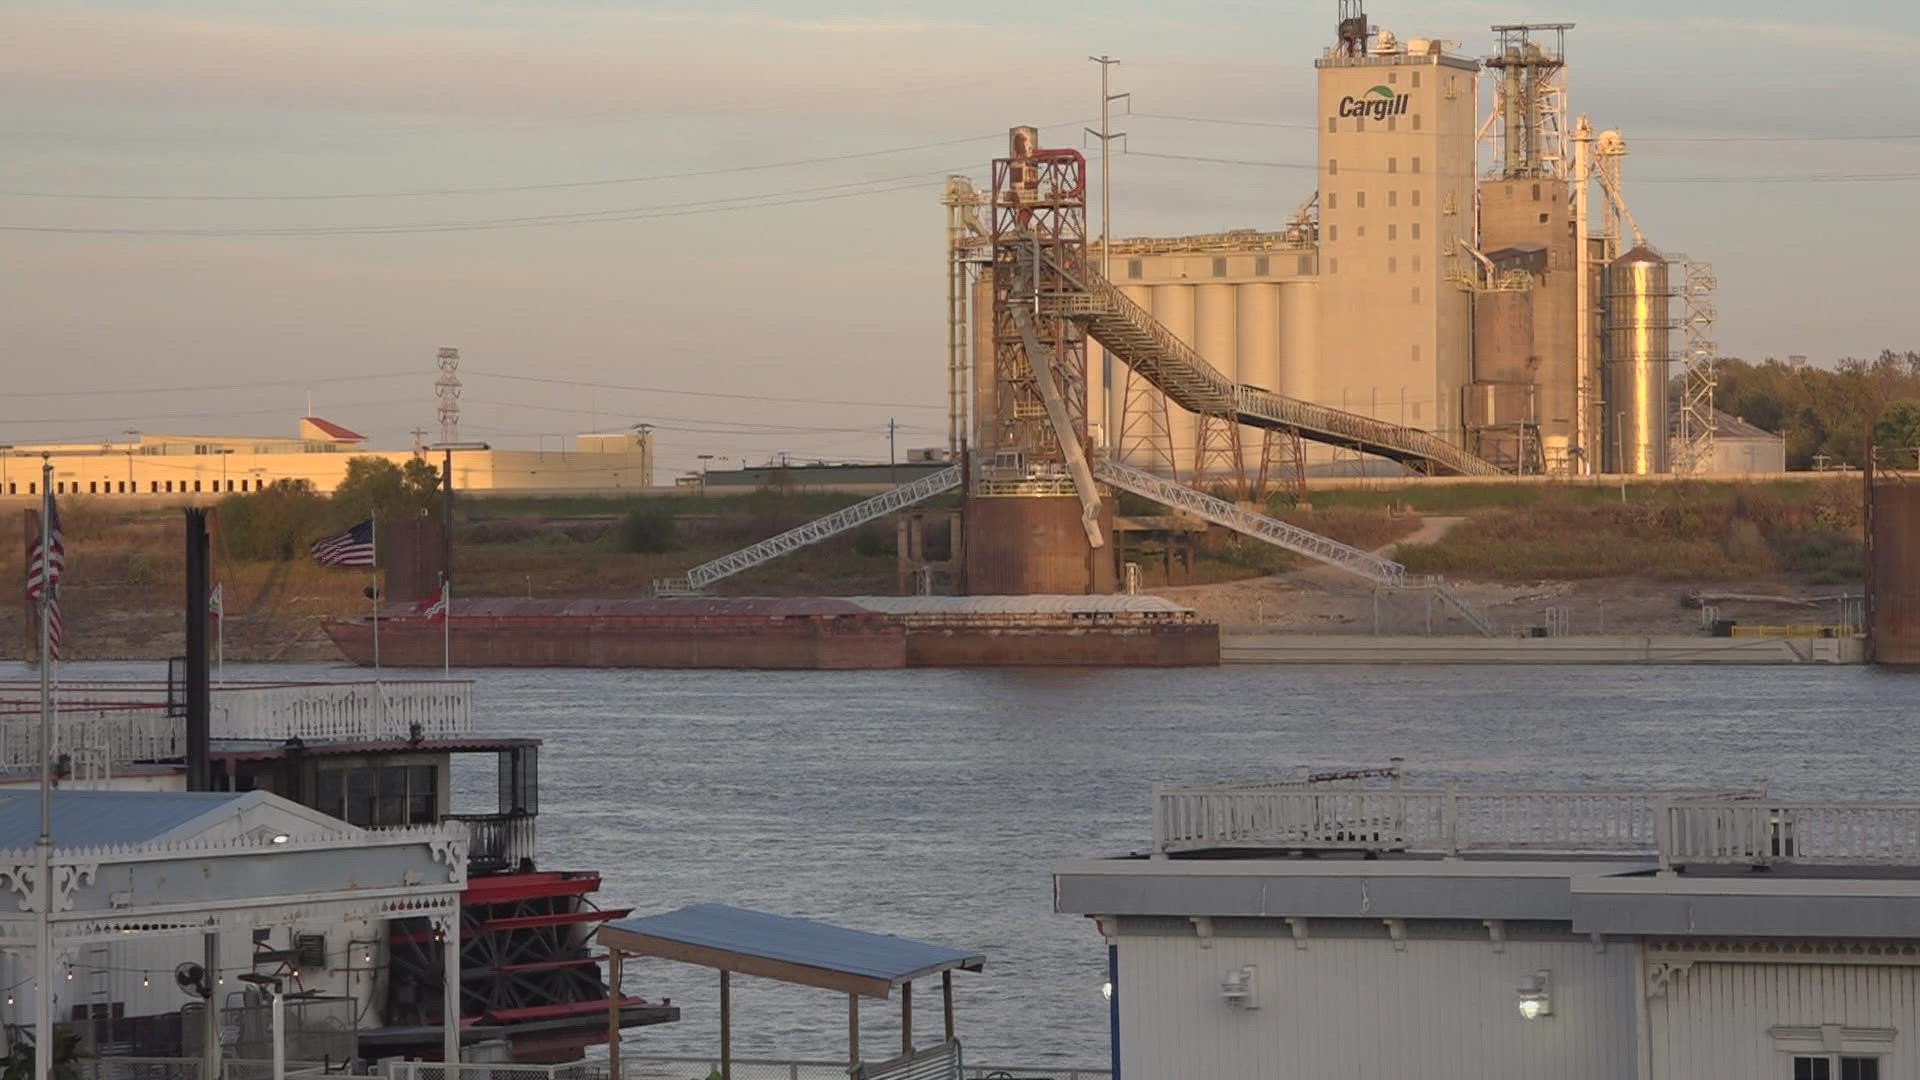 The Mississippi River is seeing low levels due to extreme flooding and now a drought in the area. It affects not only businesses but also energy and food prices.